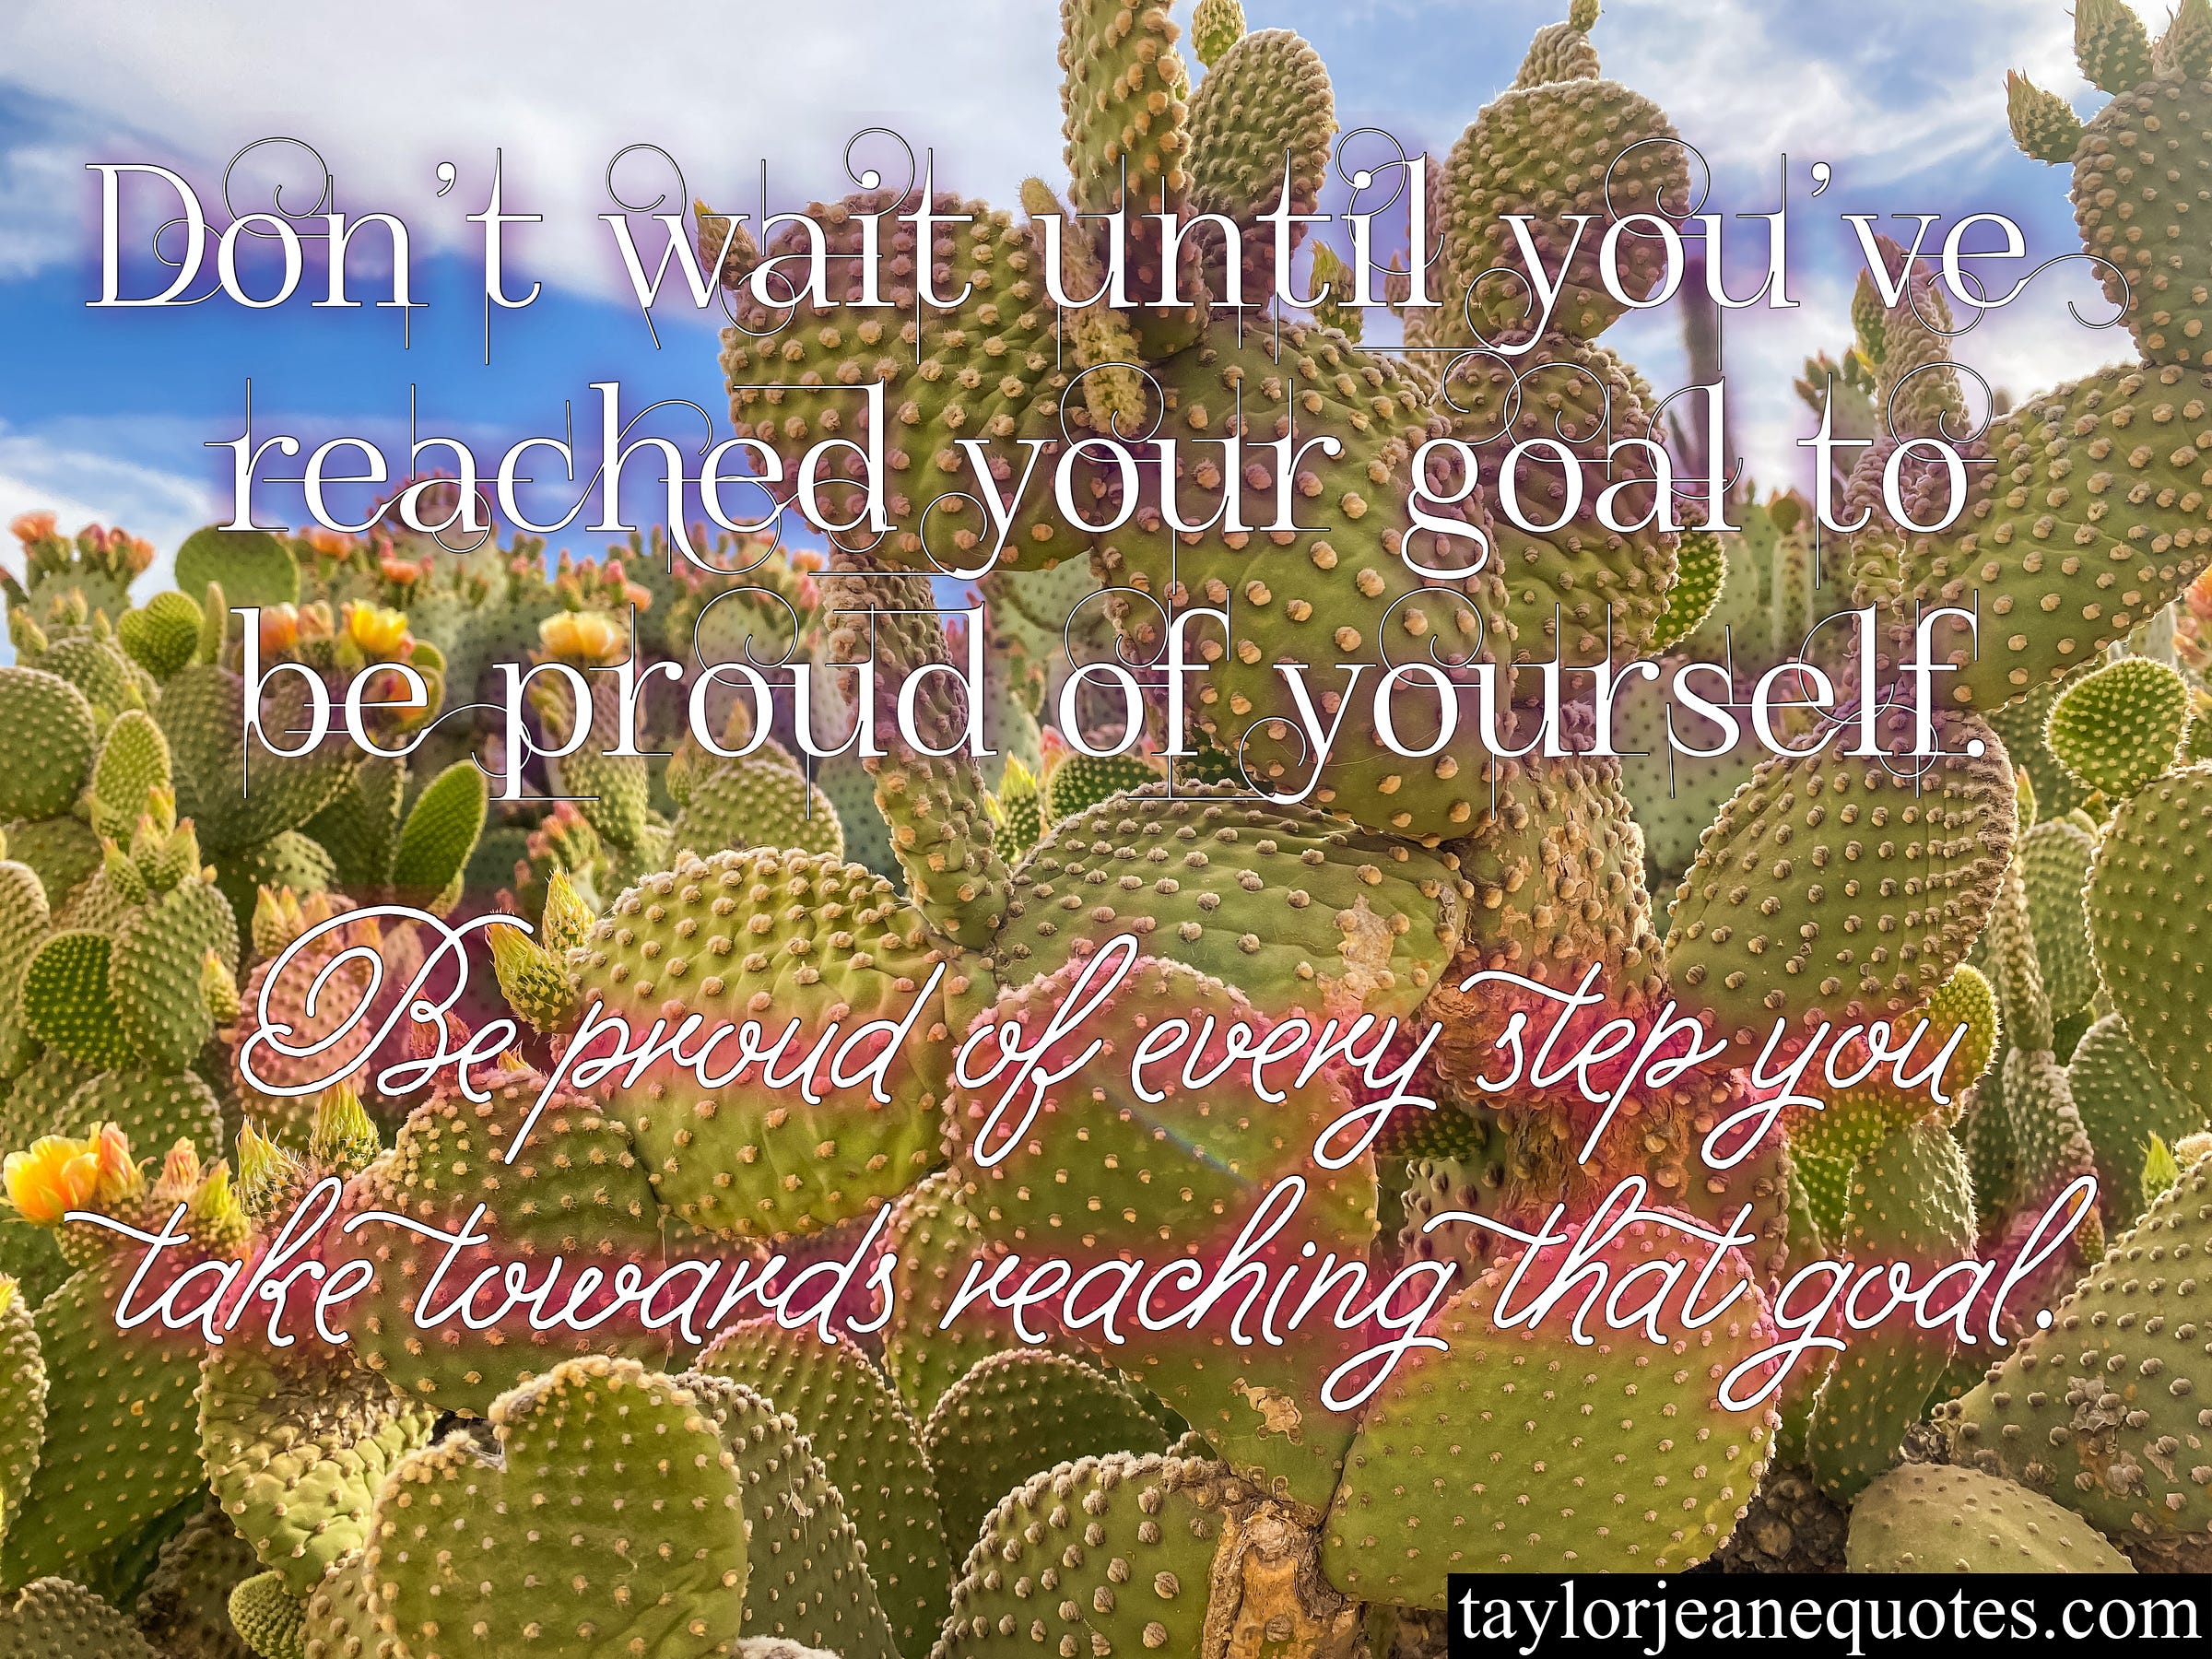 taylor jeane quotes, taylor jeane, taylor wilson, inspirational quotes, motivational quotes, self love quotes, be proud of yourself quotes, goal quotes, progress quotes, cactus, phoenix botanical gardens, accomplishment quotes, don't be hard on yourself quotes